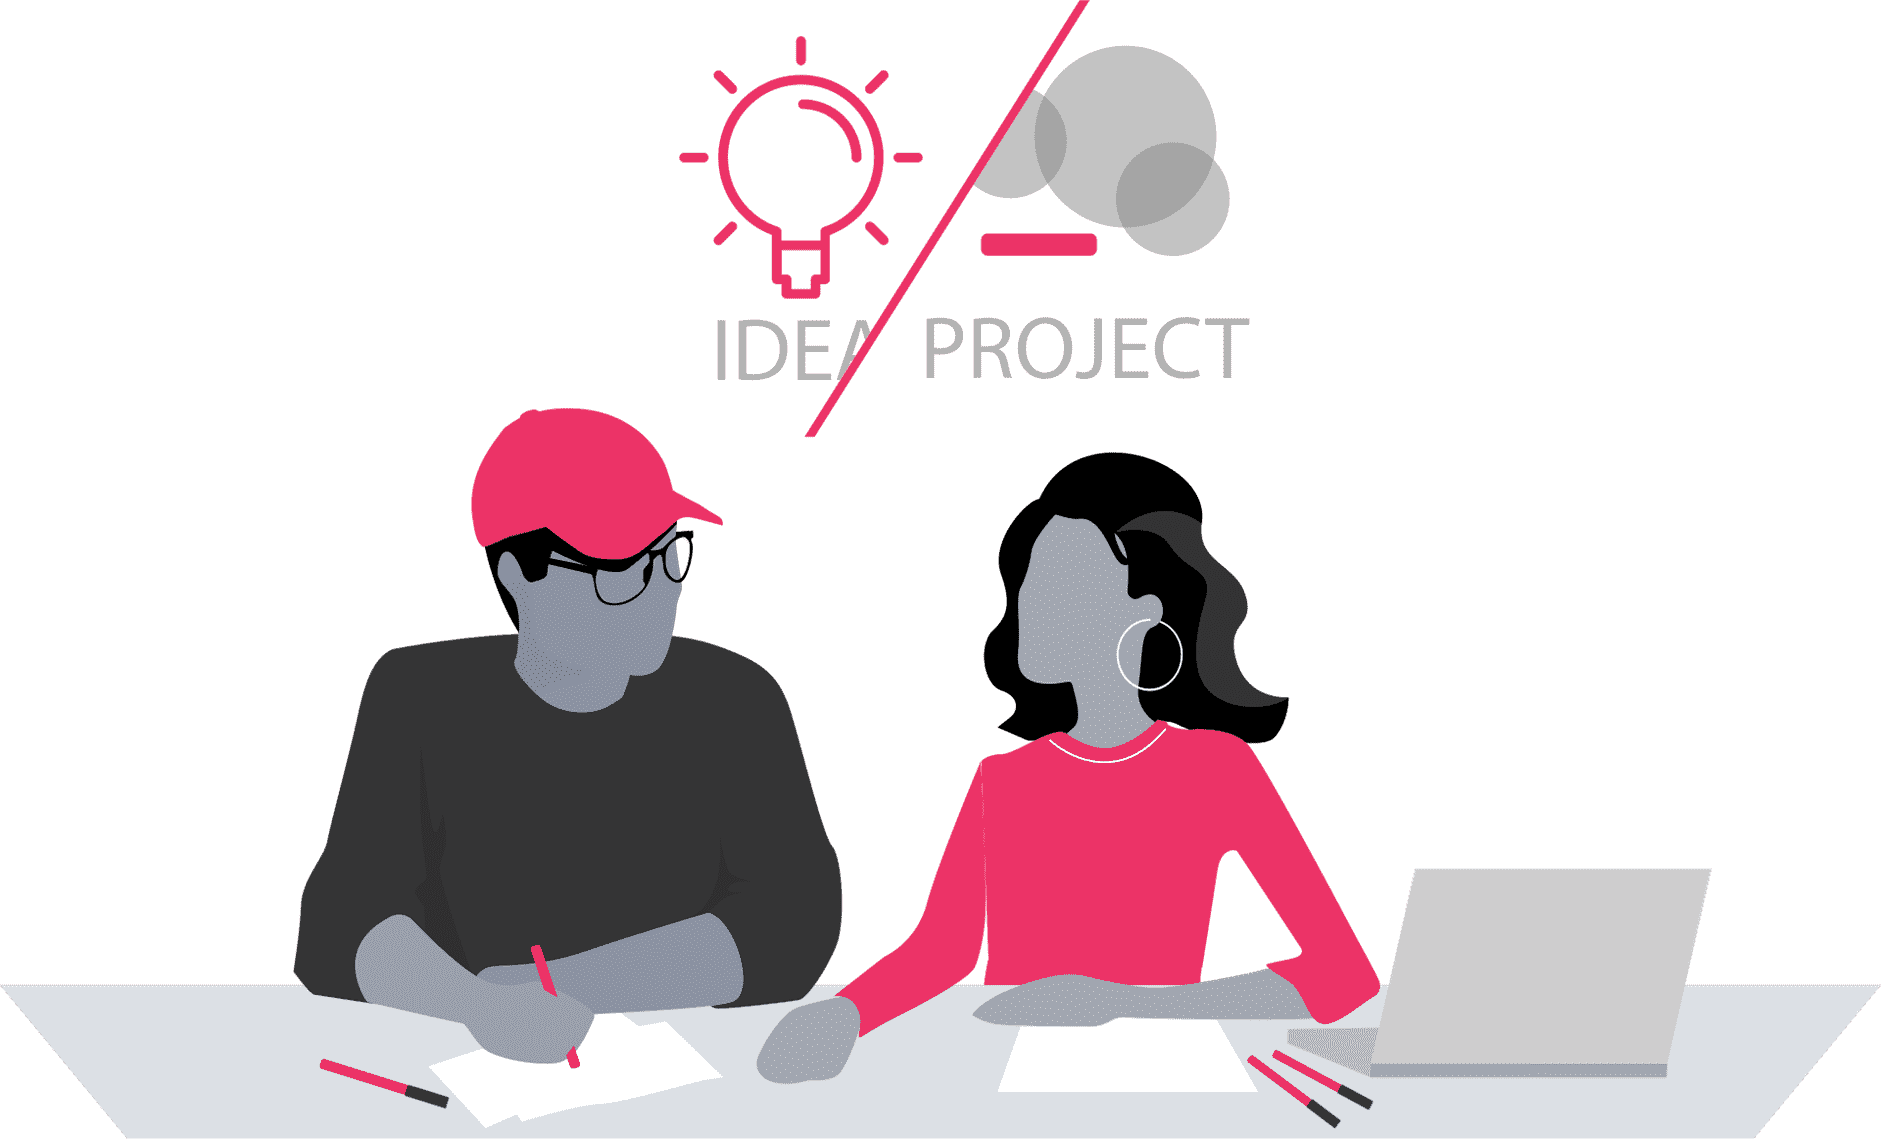 From idea to project